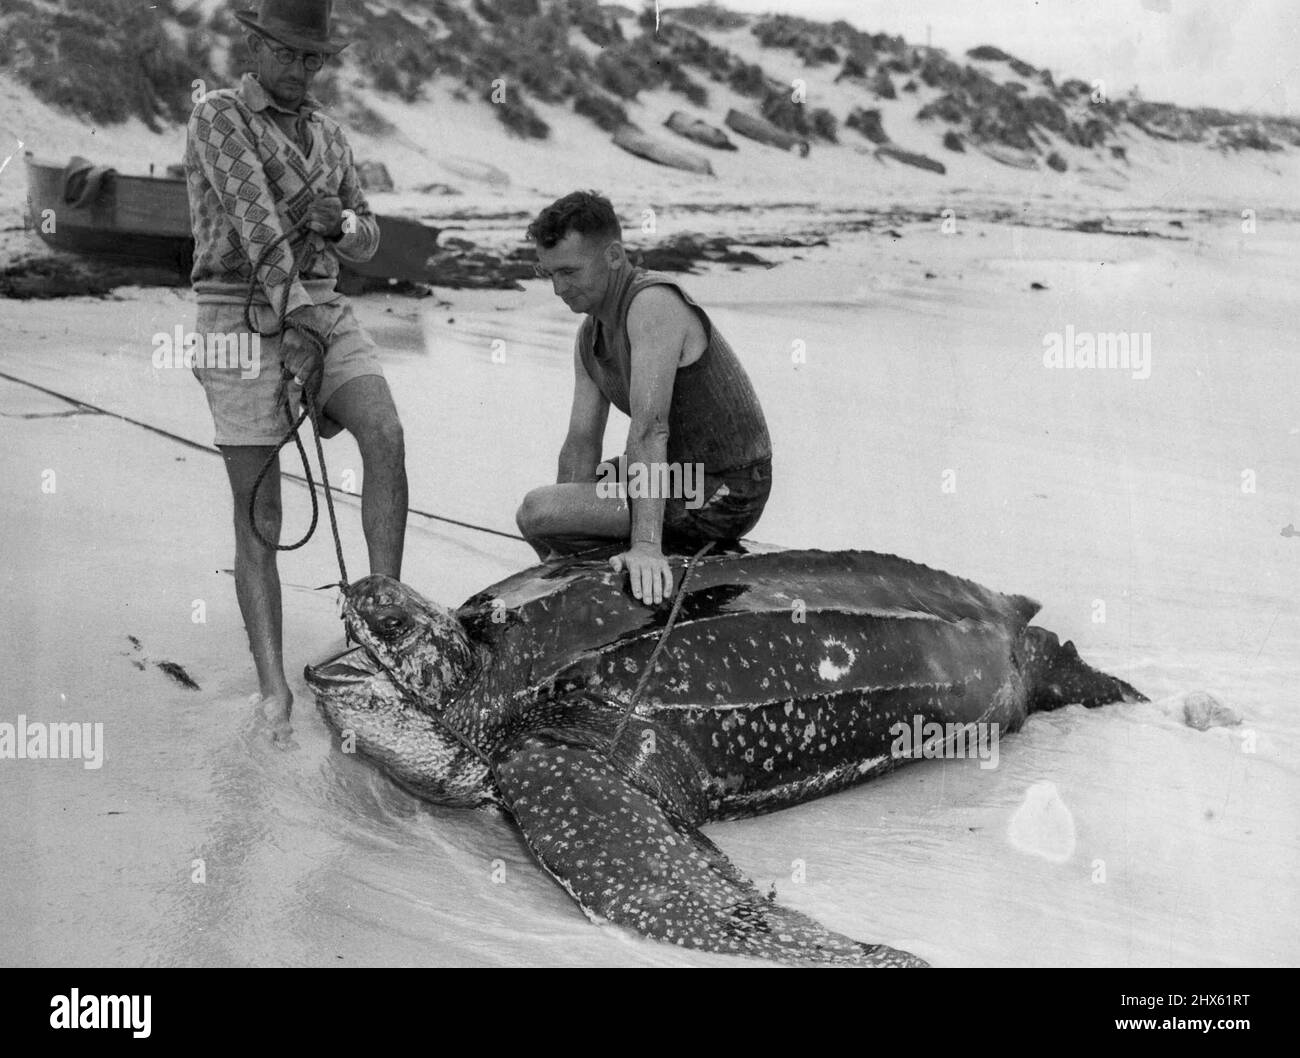 There's The Best part of a ton weight in this 7ft 6in turtle caught by fisherman John Harvey (right) when it became entangled in his shark line off Cottesloe Beach (W.A). It was a job for Harvey to tow the turtle to shore in his dinghy. April 19, 1952. Stock Photo